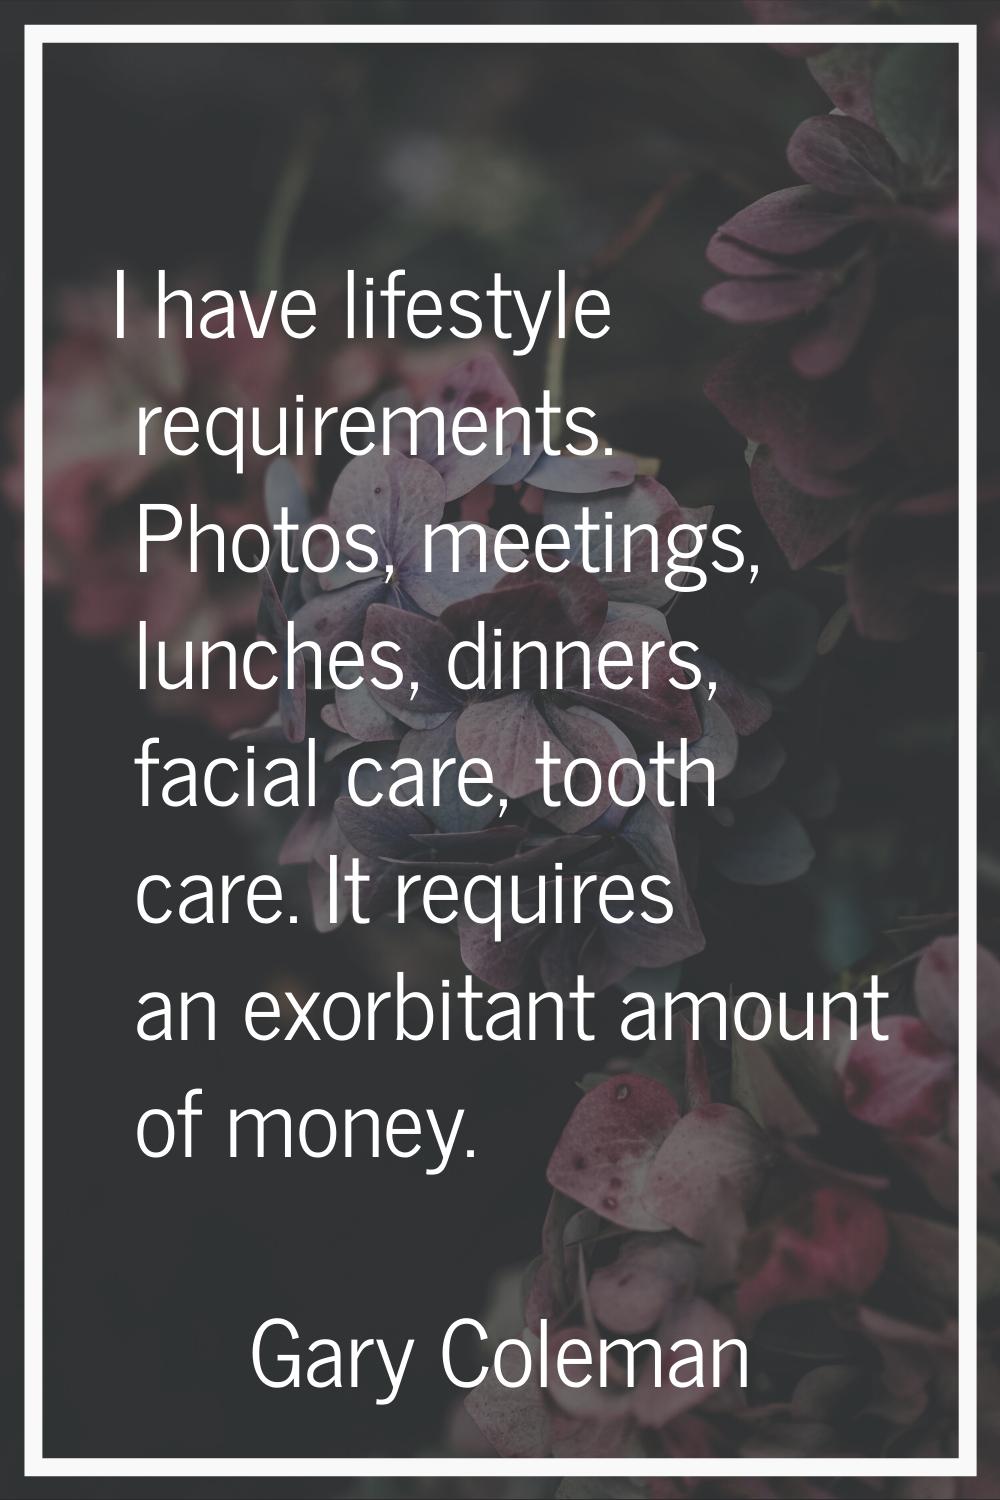 I have lifestyle requirements. Photos, meetings, lunches, dinners, facial care, tooth care. It requ